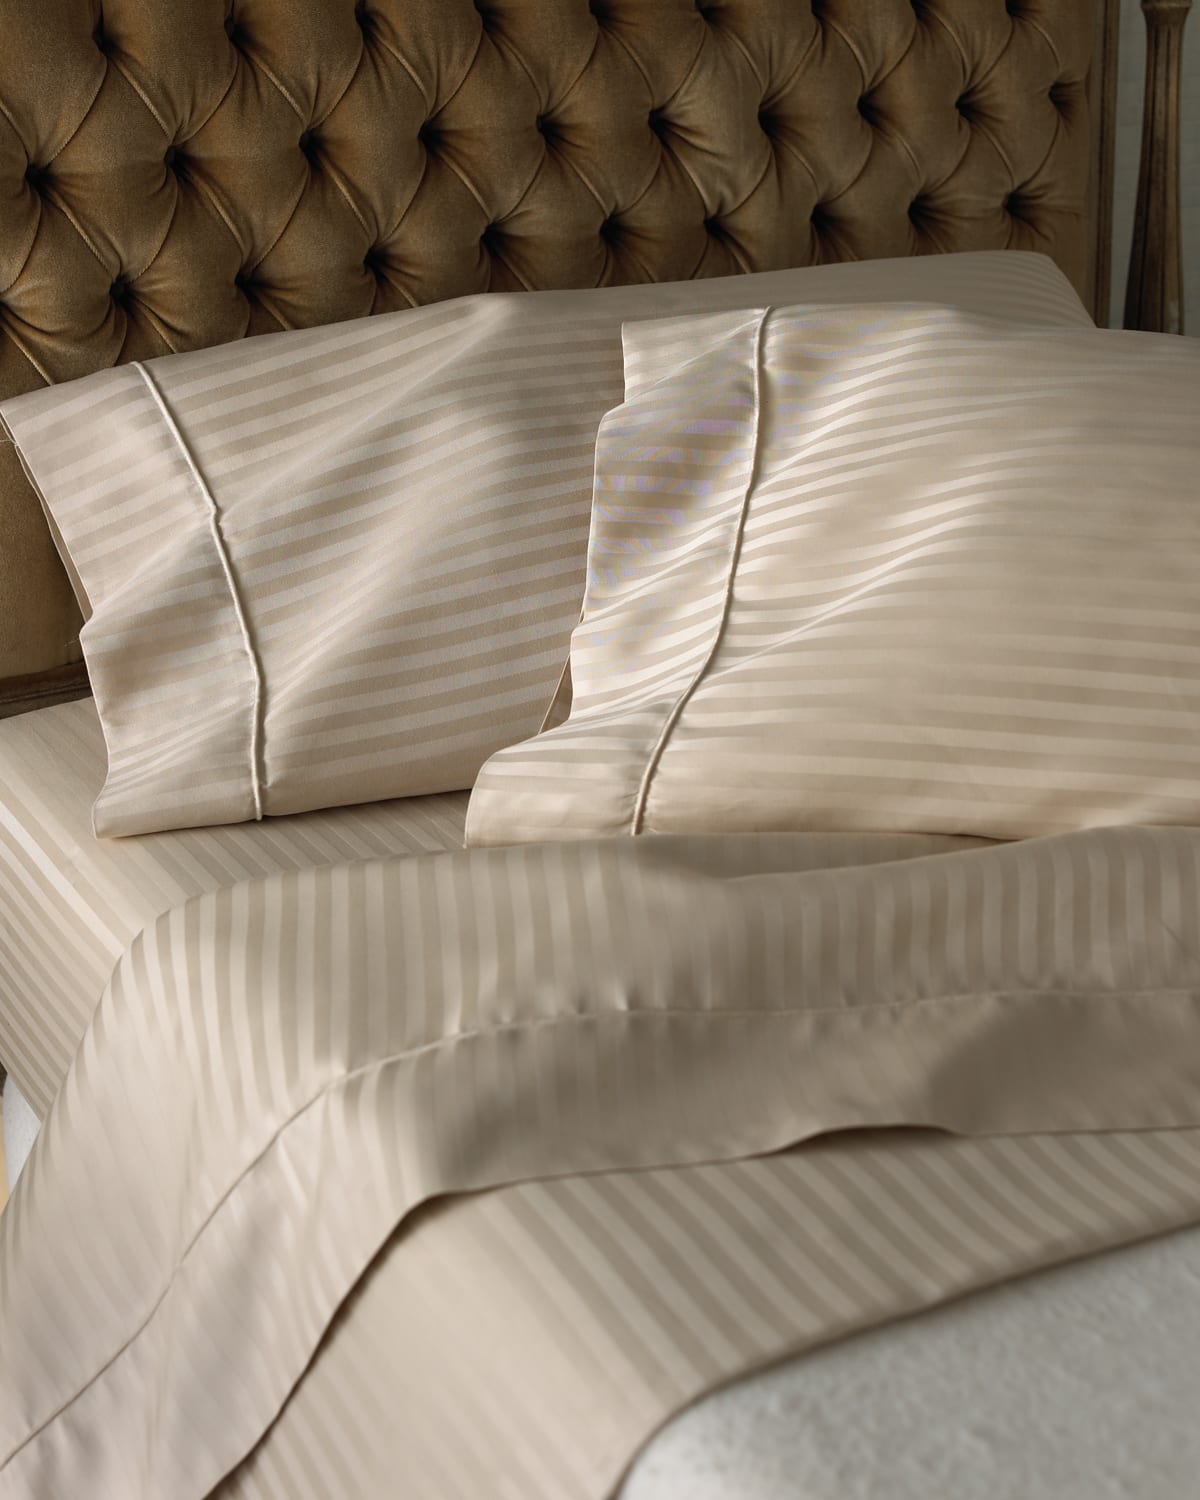 464-Thread-Count Percale Sheets | Neiman Marcus